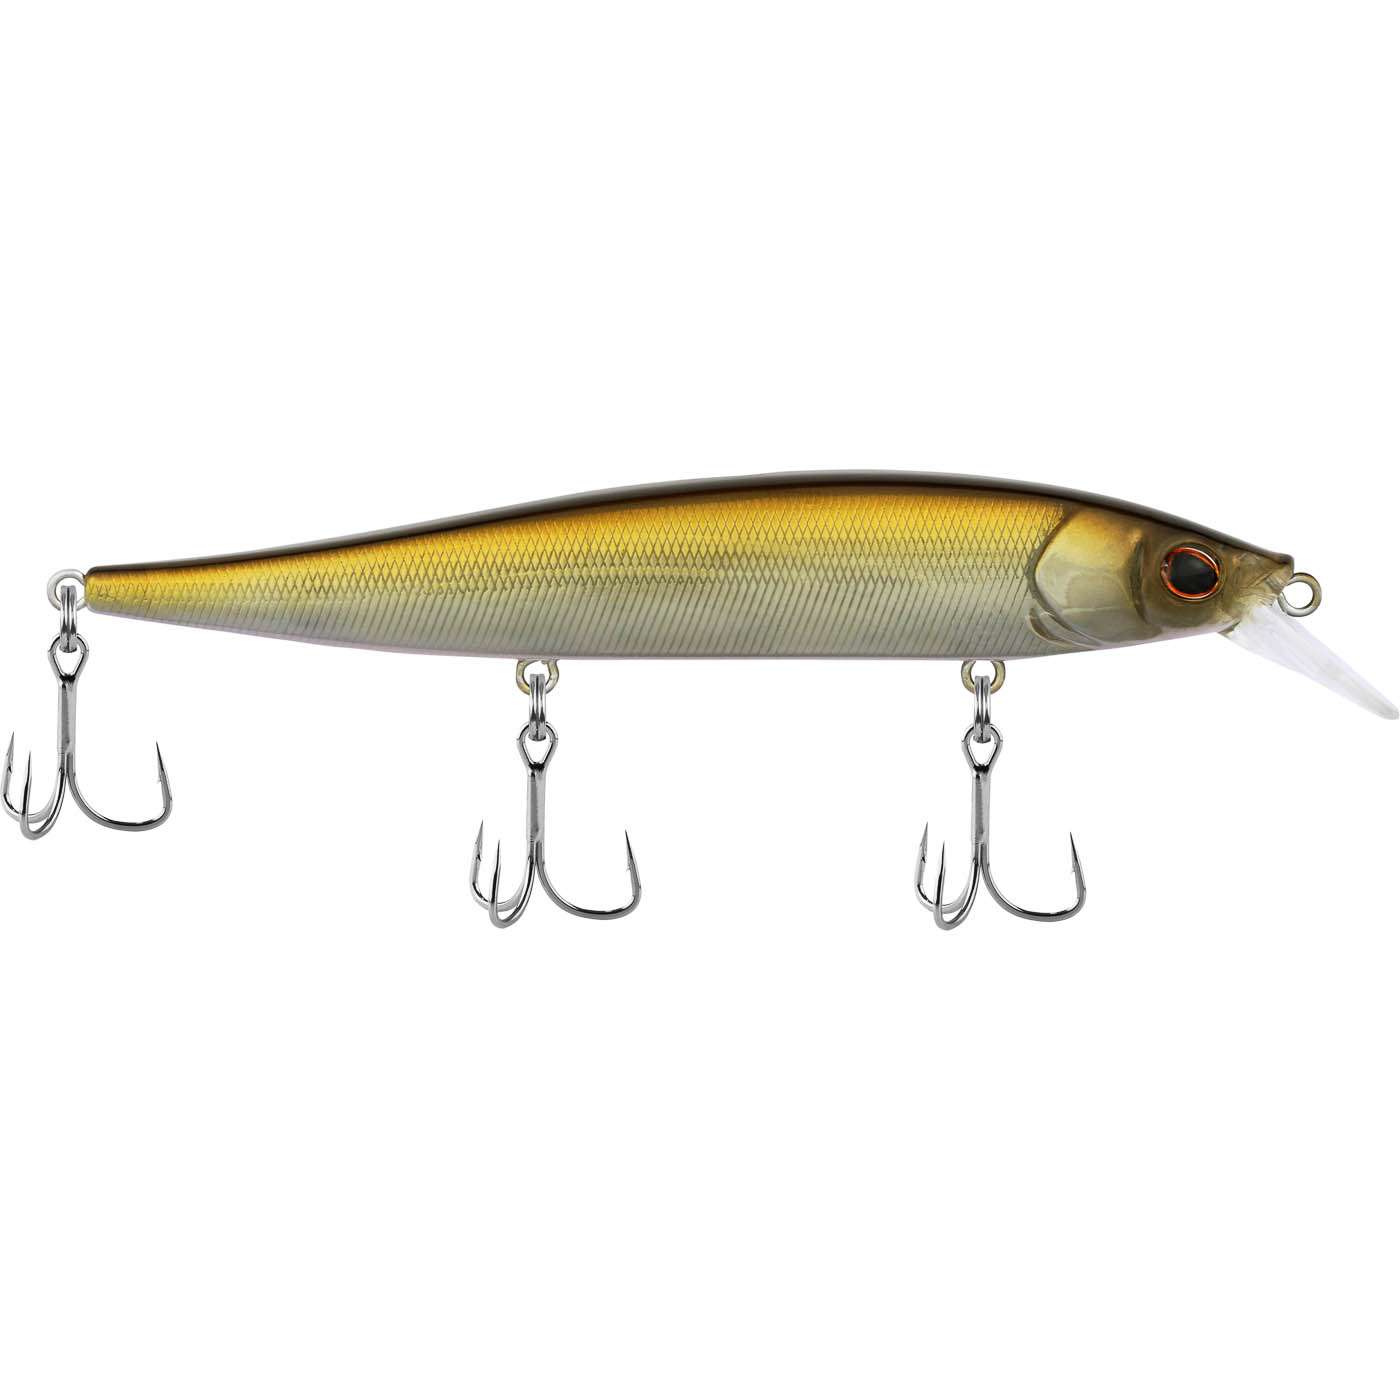 <p><strong>Berkley Stunna</strong></p><p>The lure used by Hank Cherry to win a second, back-to-back world championship is the Berkley Stunna. The Stunna is a radical departure from traditional jerkbait designs. The Stunna has a crisp, side-to-side darting action and salacious shimmy when killed or on the fallâone which draws vicious strikes with its amplified side flash. A novel onboard tungsten inertial transfer system allows the Stunna to cast like a bullet and work water unreachable by traditional jerkbaits. The Stunna is equipped with tournament-proven Berkley Fusion19 EWG trebles. Available in two diving depths, the Stunna 112 dives 3â to 6â and the Stunna 112+1 dives 6â to 10â, and comes in 14 fish-approved colors. Available July 2021. $14.99. <a href=